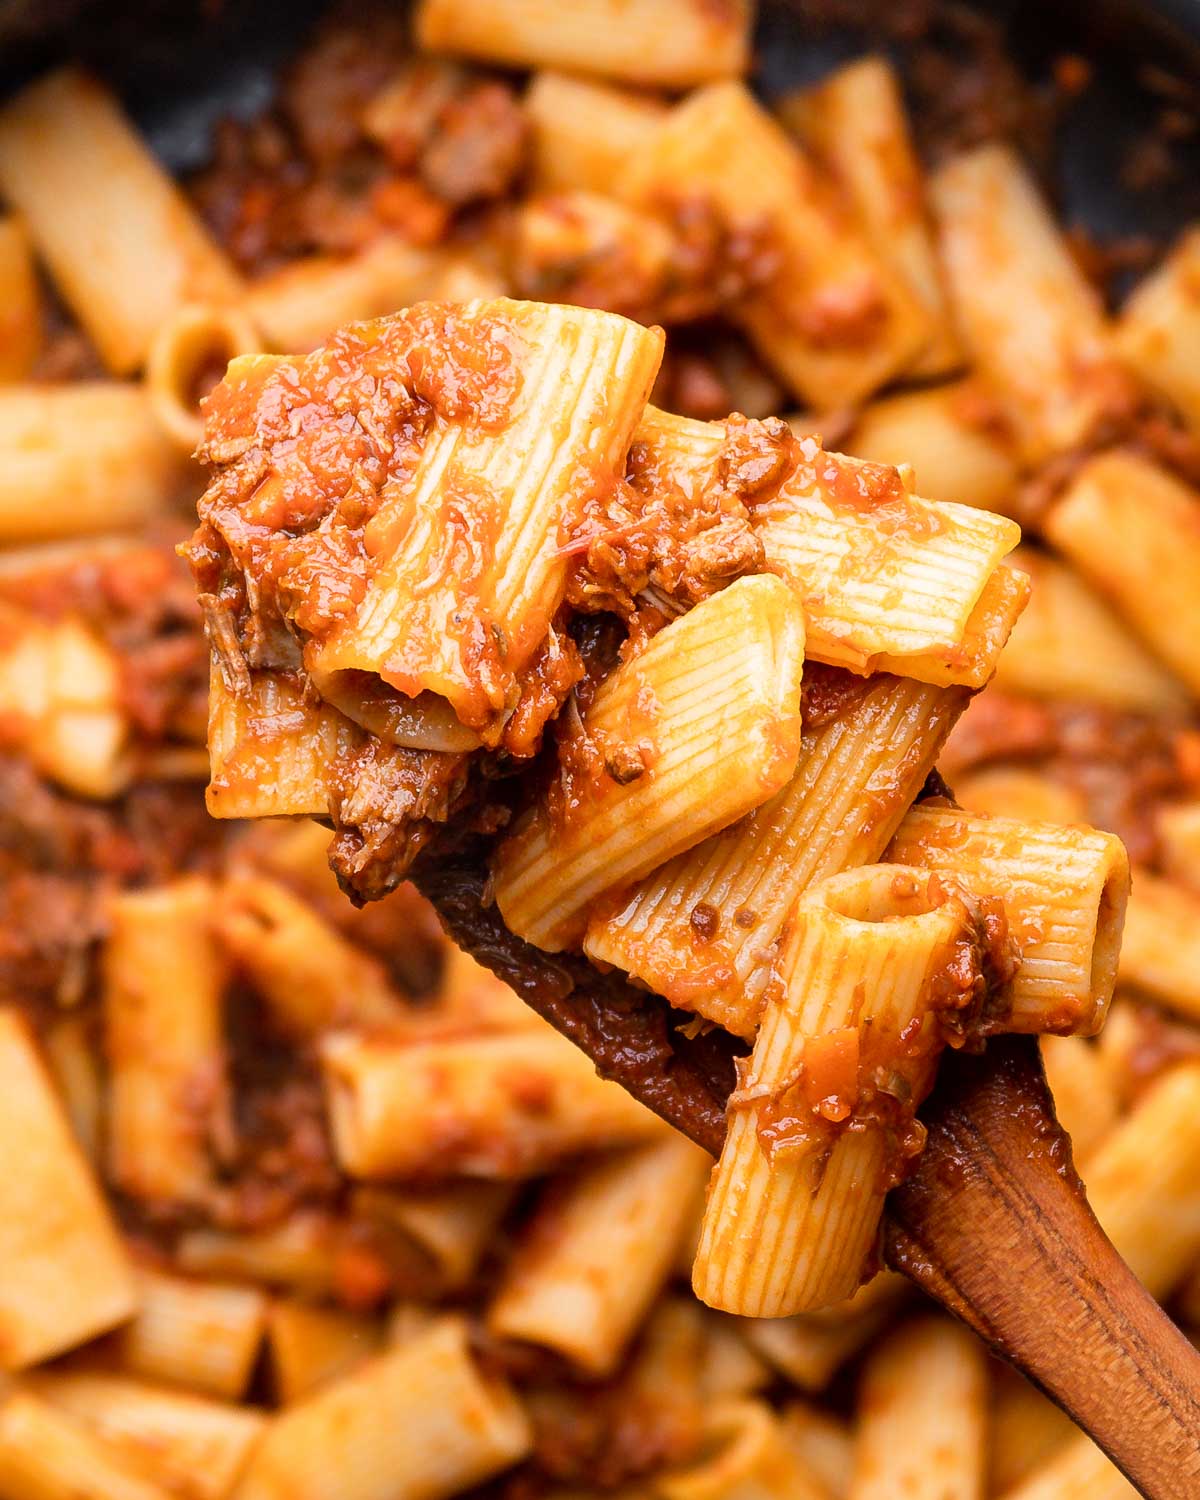 Wooden spoon holding rigatoni with lamb sauce.